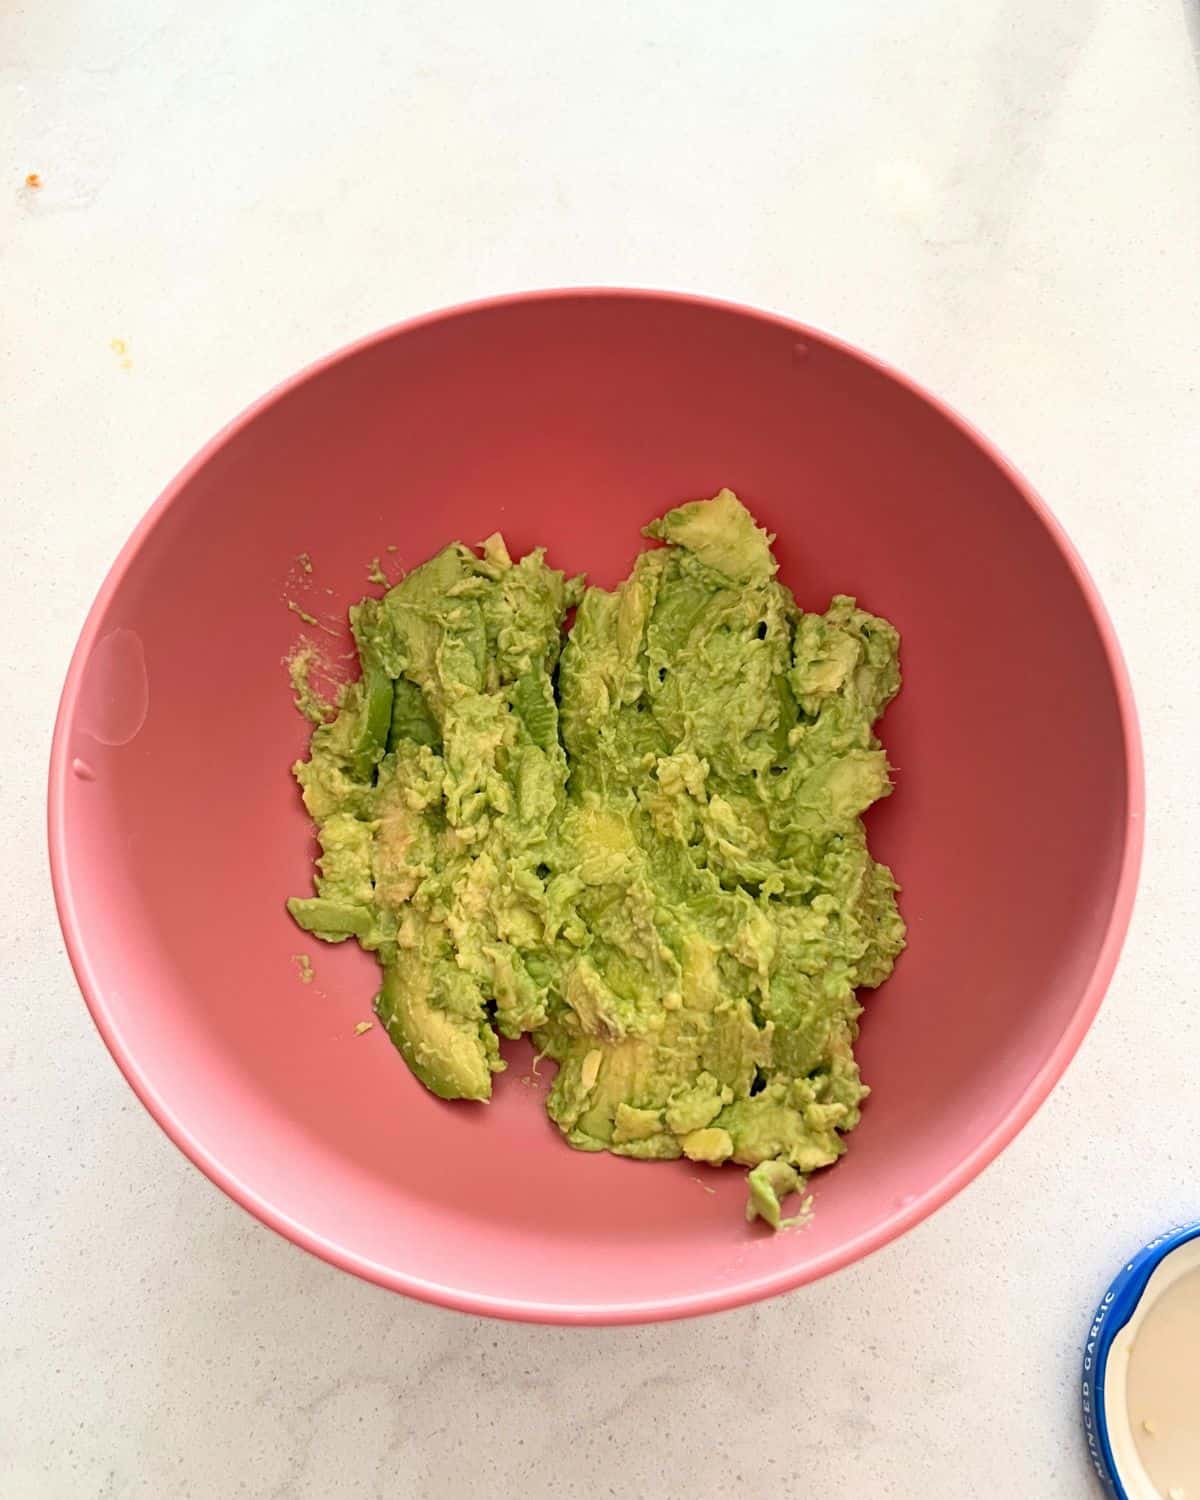 Mashed avocado and seasonings in a boowl. 